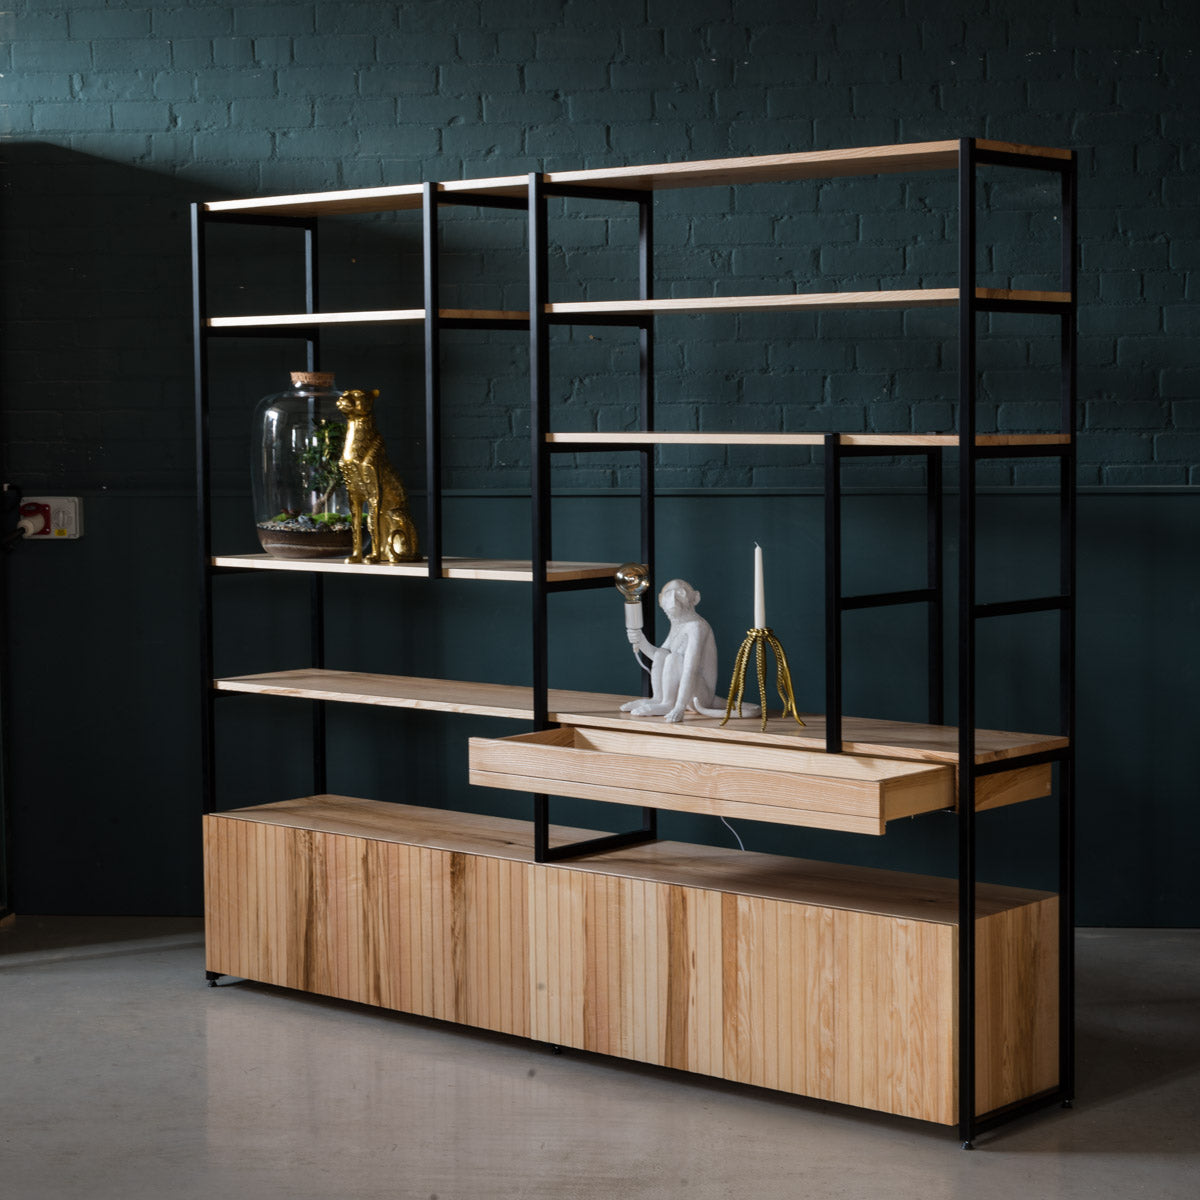 An image of the Shelving Unit, Frame product available from Koda Studios